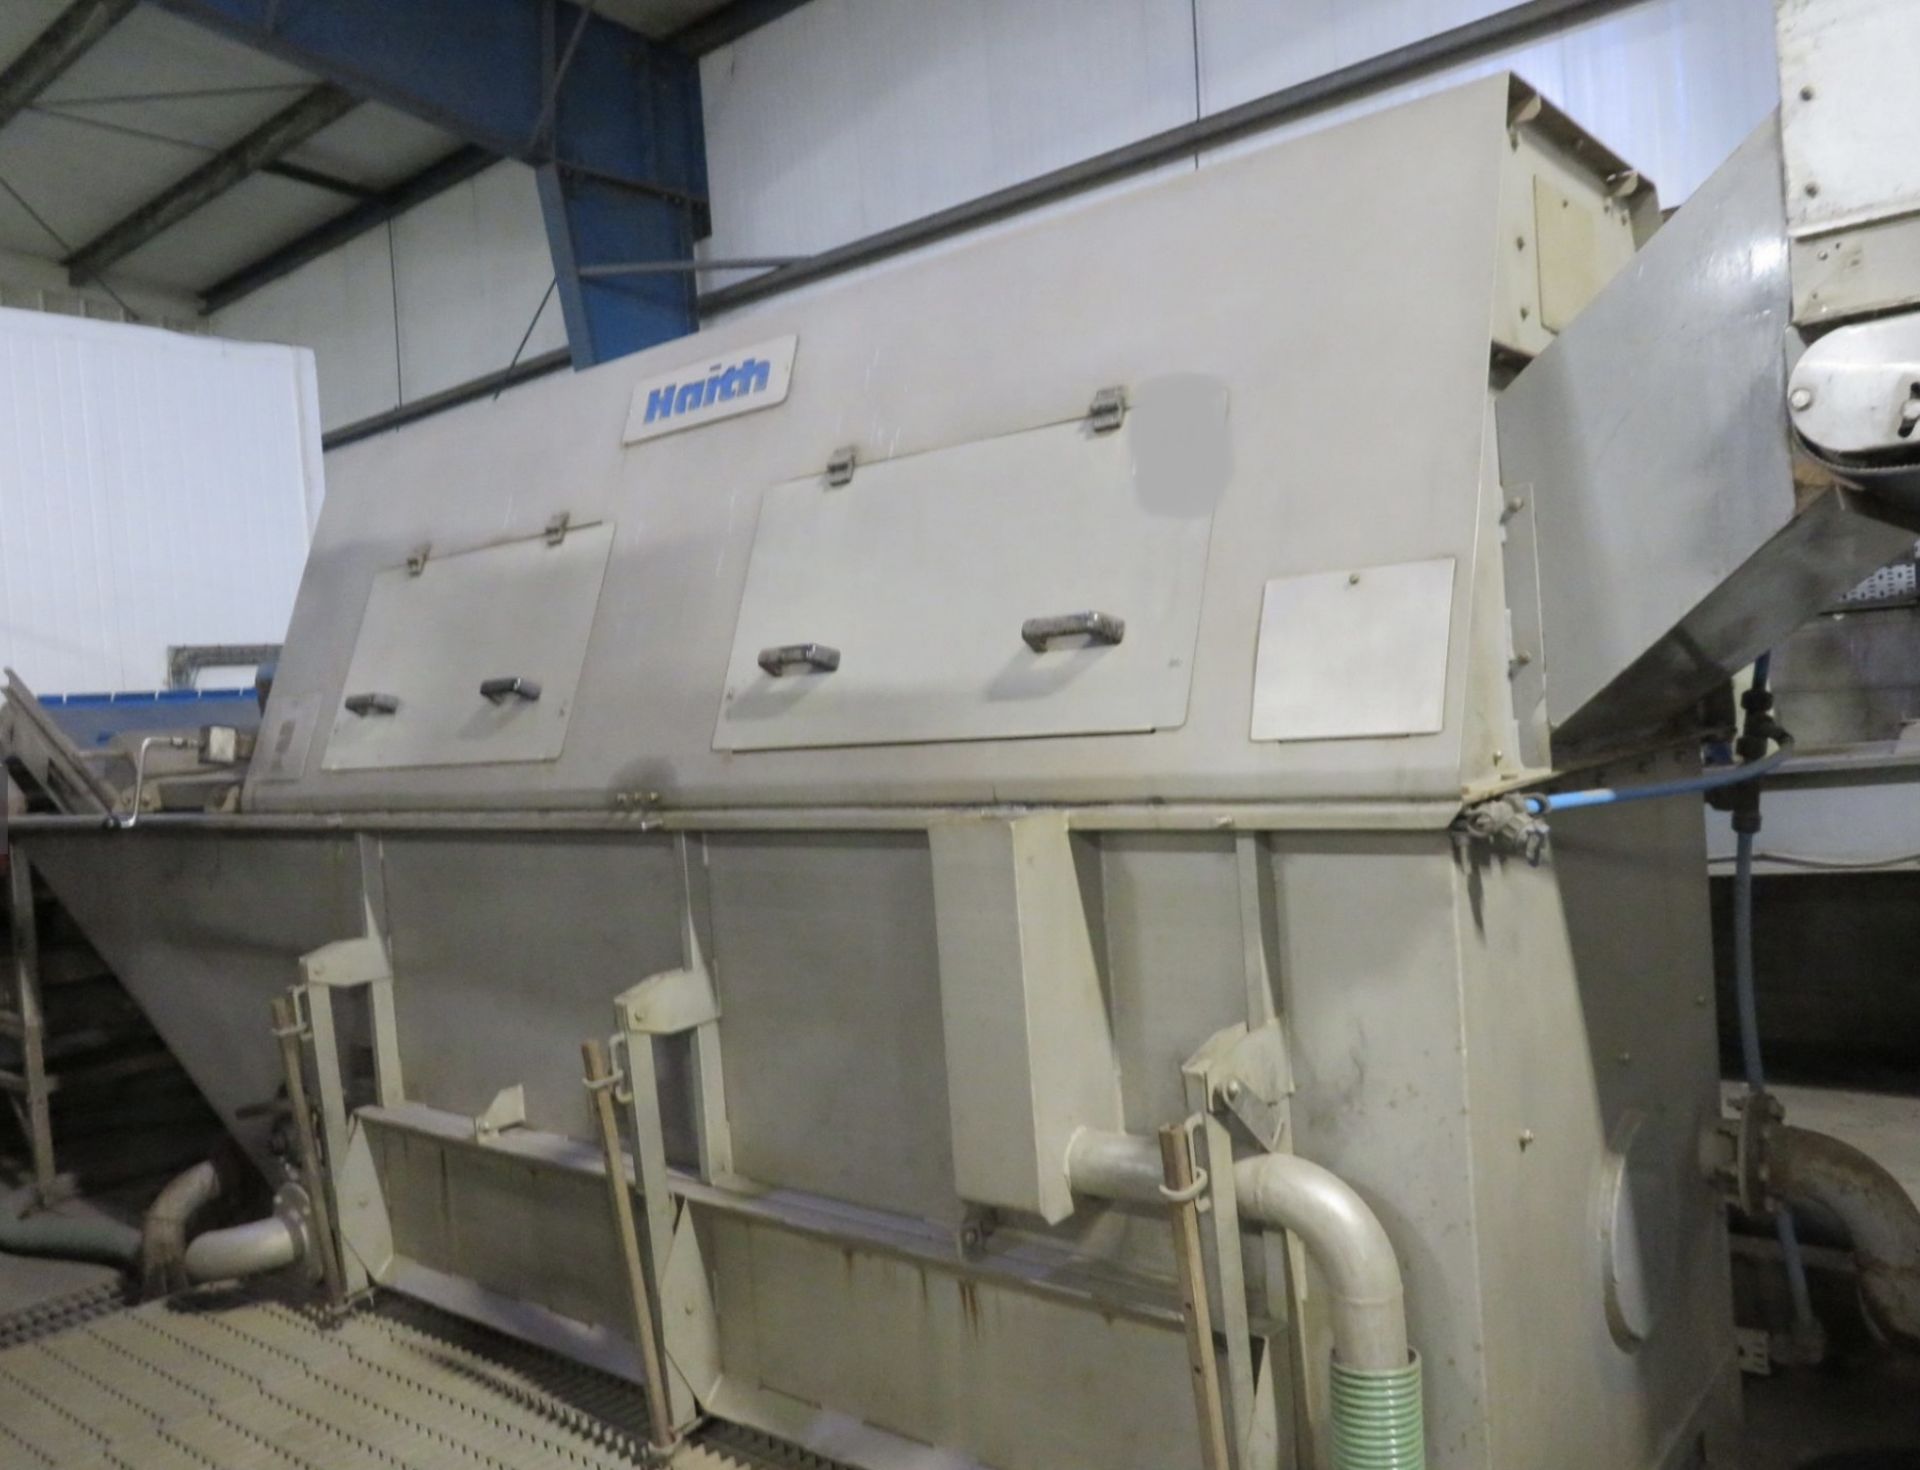 Haith Stainless Steel Washer, approx. 2m wide, ove